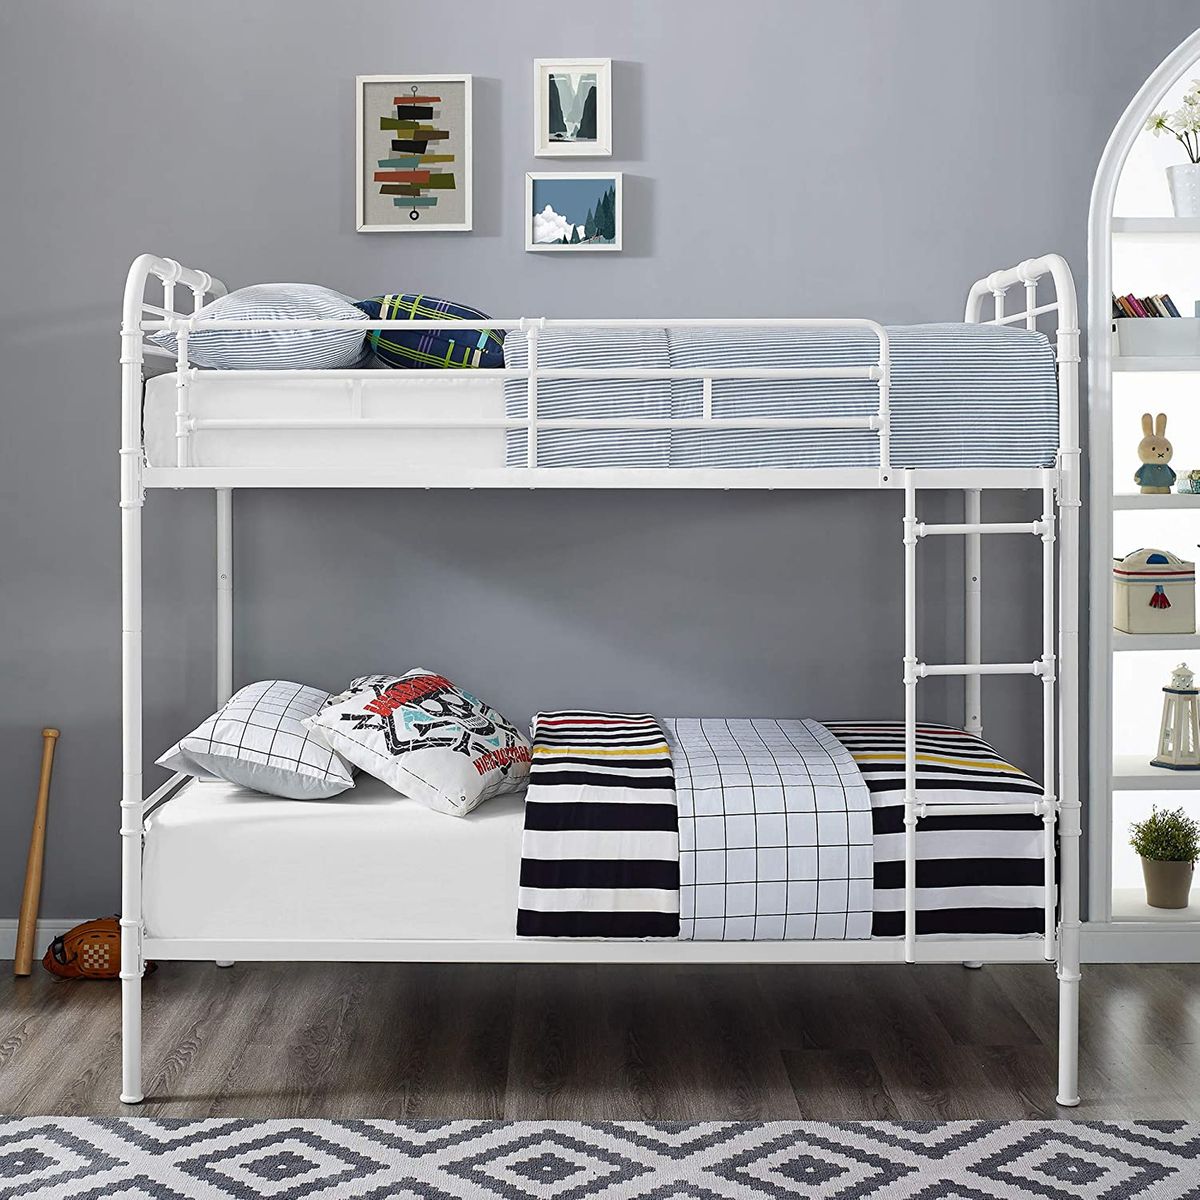 8 Best Bunk Beds 2020 The Strategist, Best Quality Metal Bunk Beds